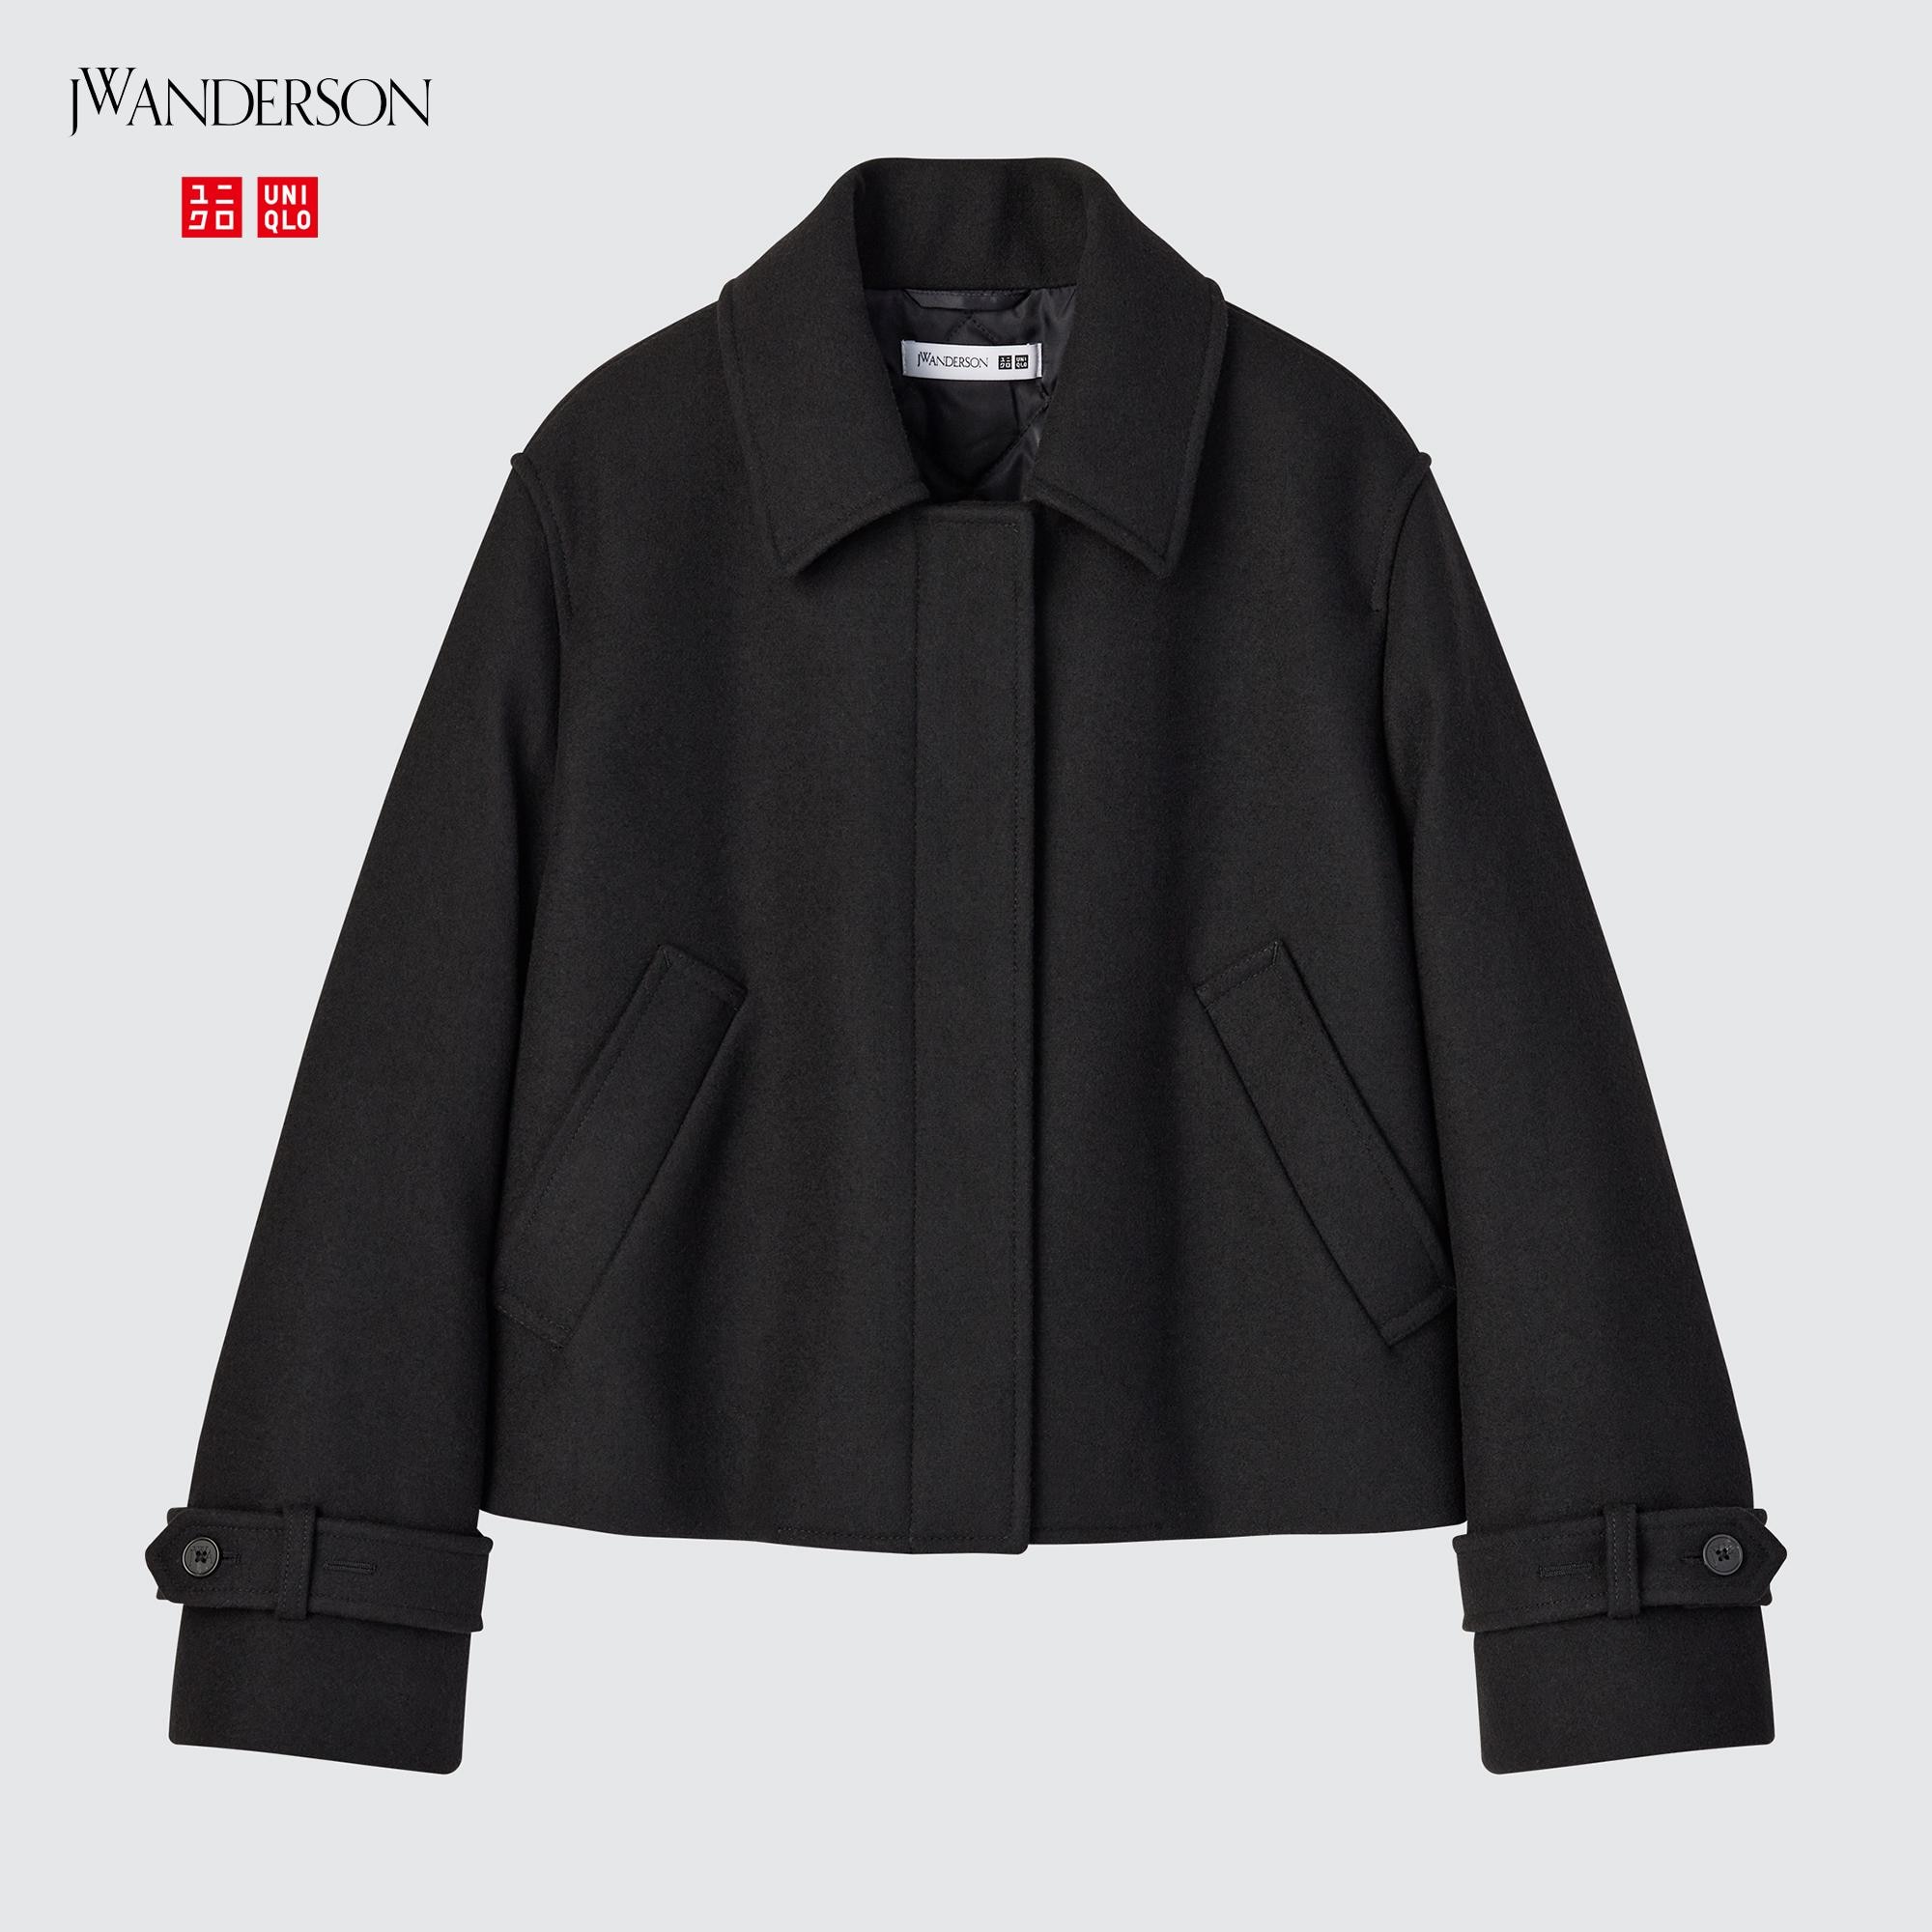 JW Anderson  Uniqlo  AW 17  Bespoke Wool Blend Quilted Jacket Mens  Fashion Coats Jackets and Outerwear on Carousell